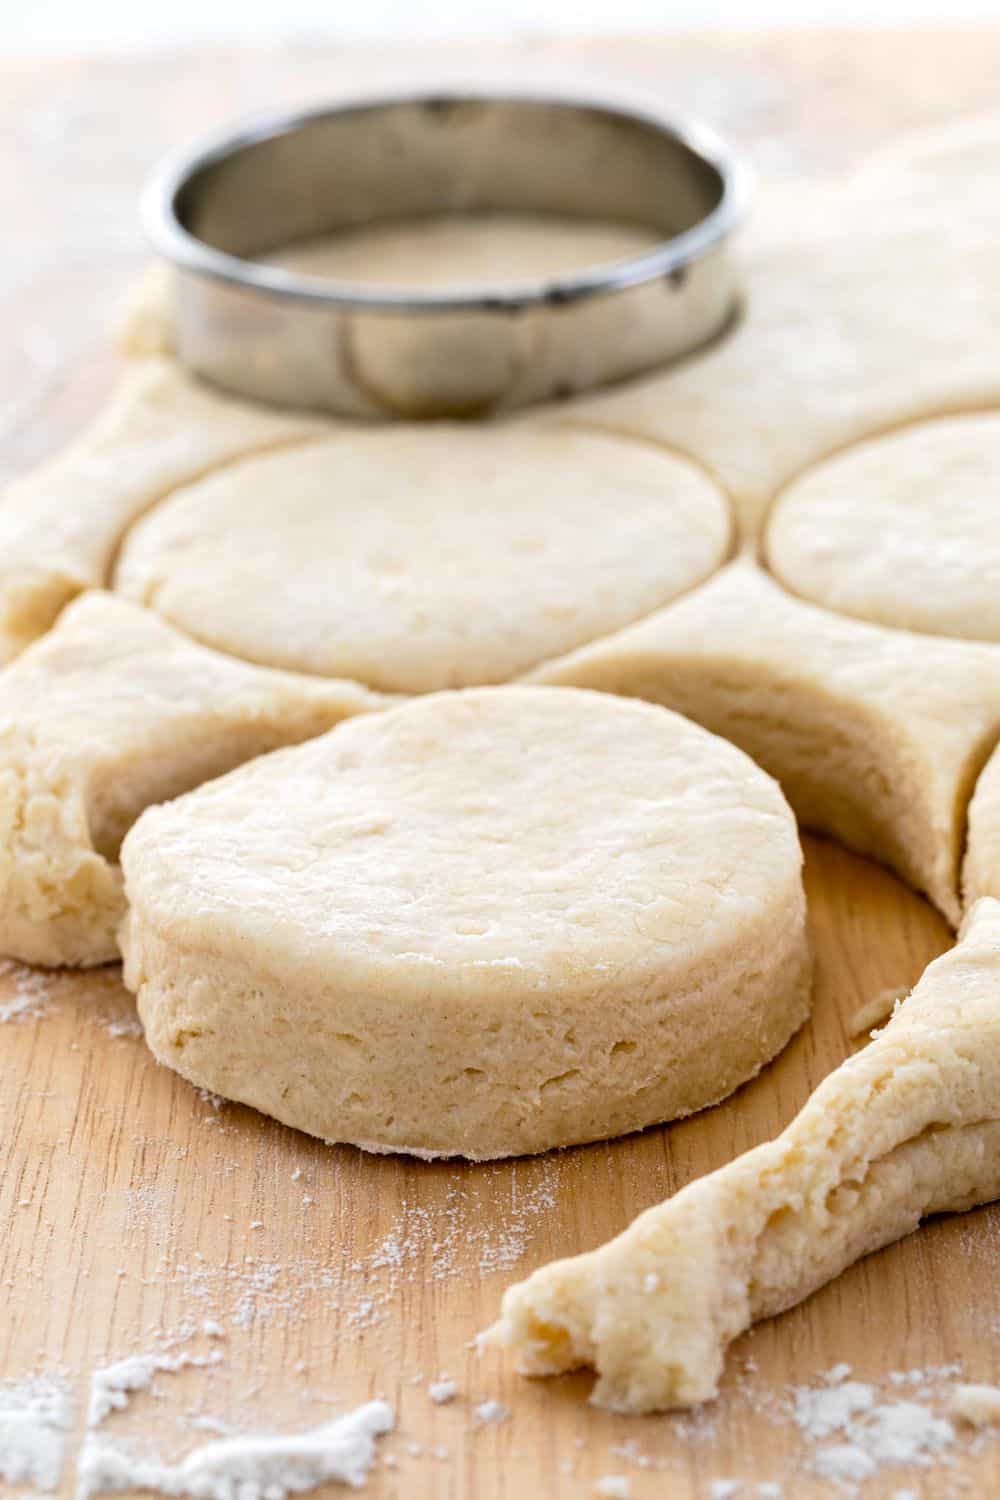 stamping out rounds of biscuits from dough